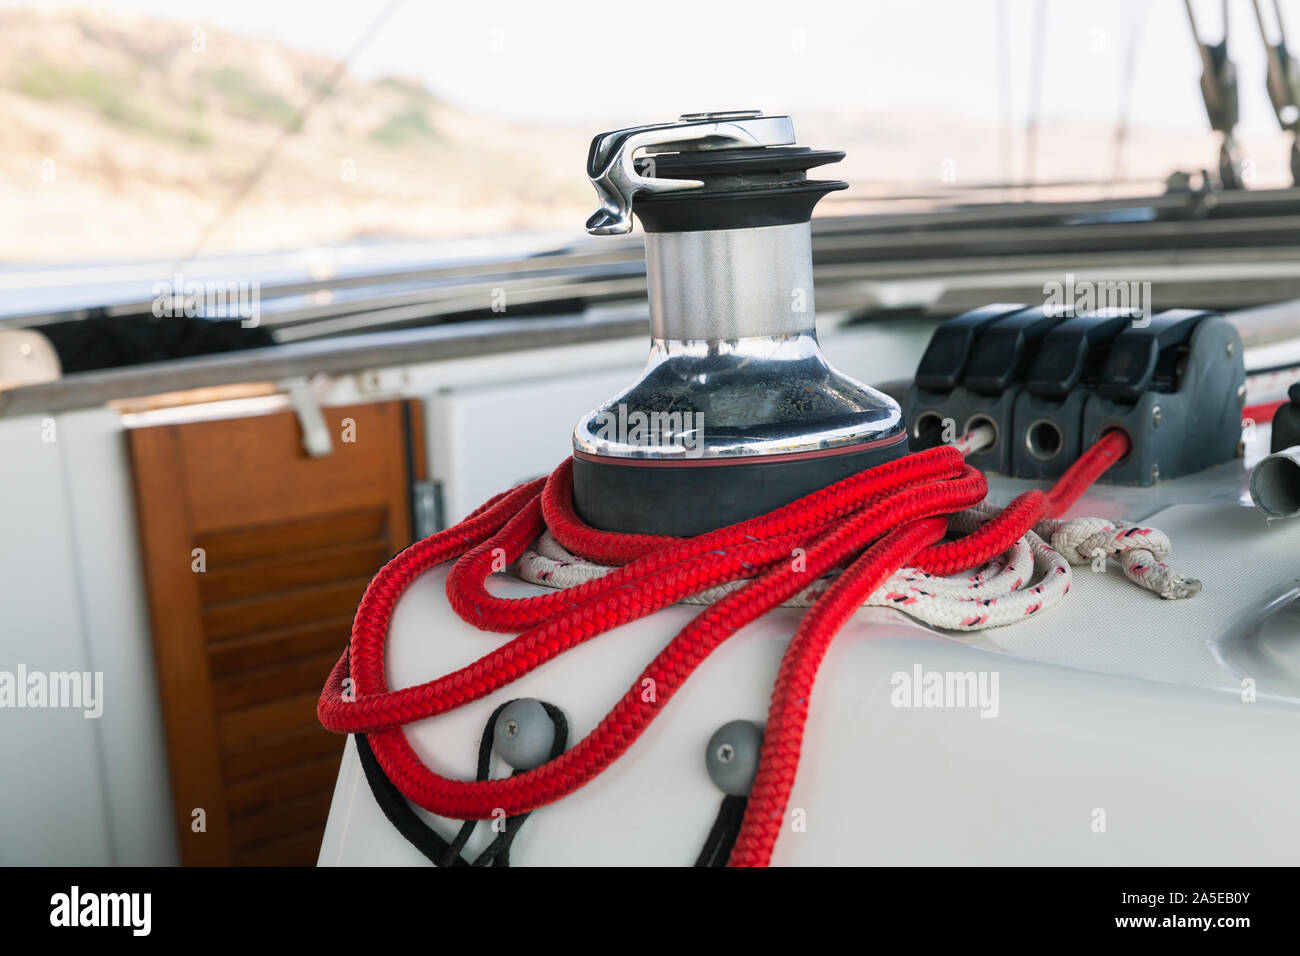 Sailing yacht equipment, sailbot winch with red rope close-up photo Stock Photo